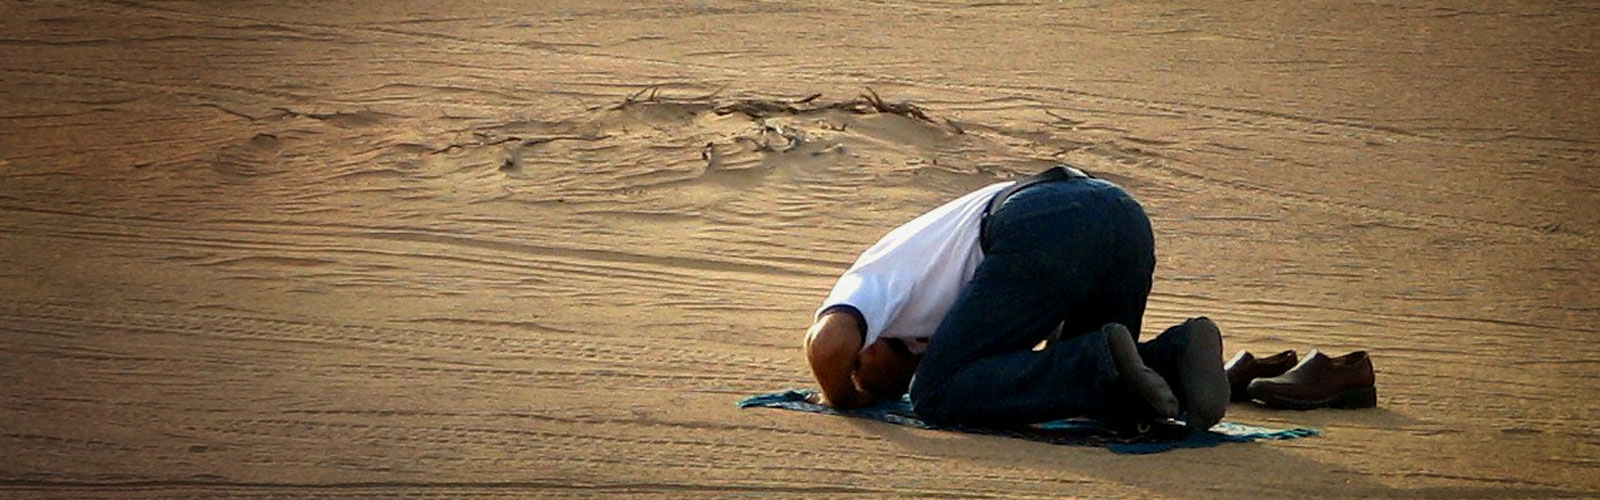 Offering Namaz regularly can reduce back pain: study